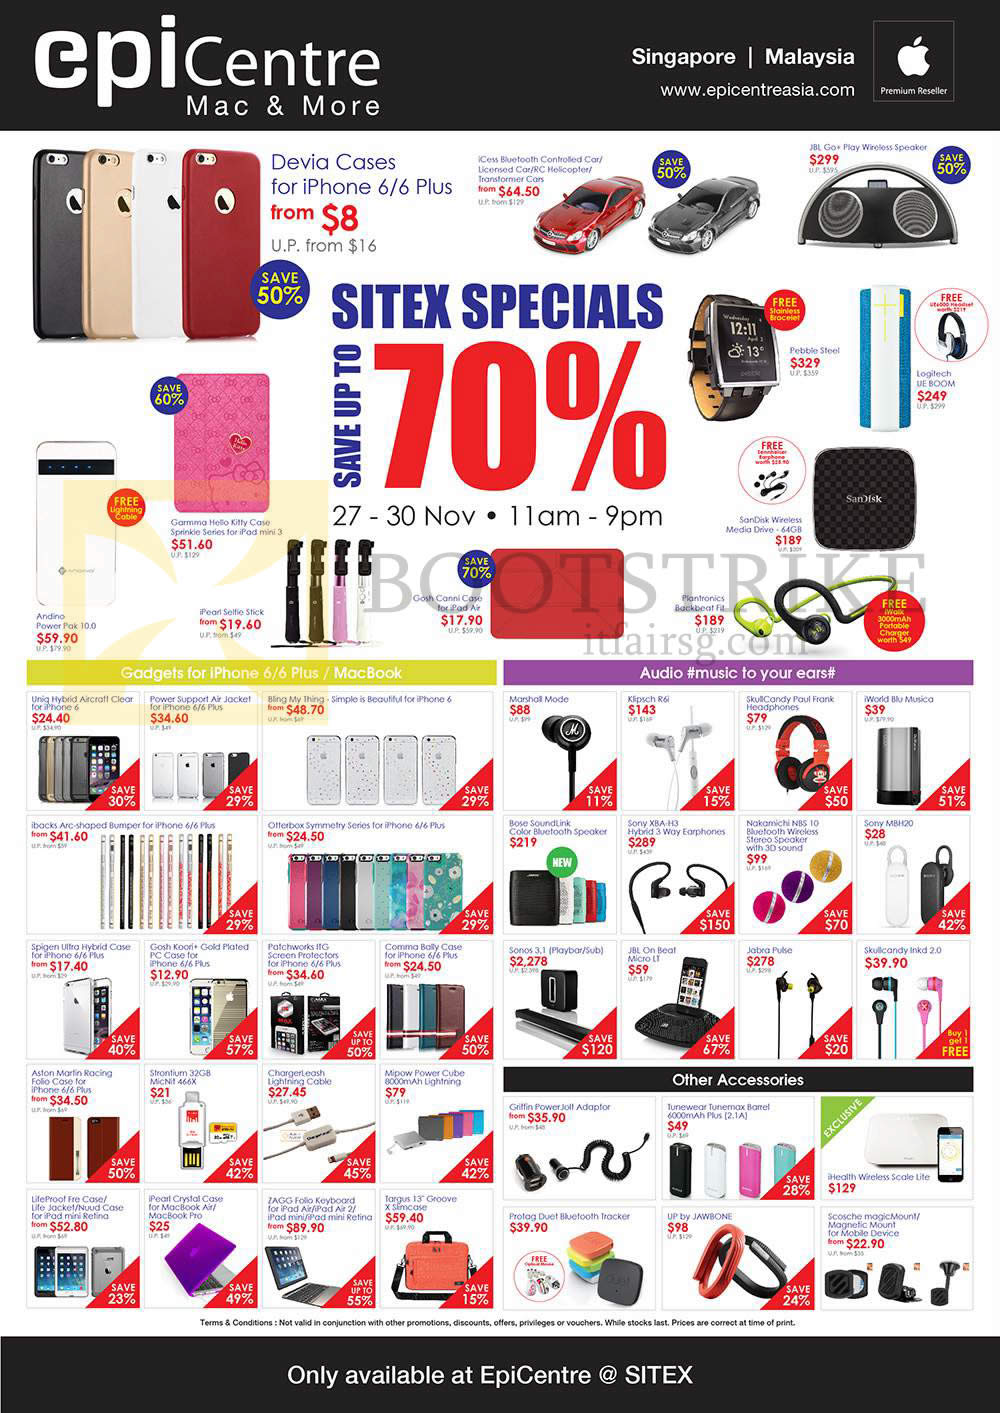 SITEX 2014 price list image brochure of Epicentre Accessories Cases, Powerbank, Screen Protectors, Lightning Cables, Earphones, Bluetooth Headsets, Docks, Jawbone, Protag Bluetooth Tracker